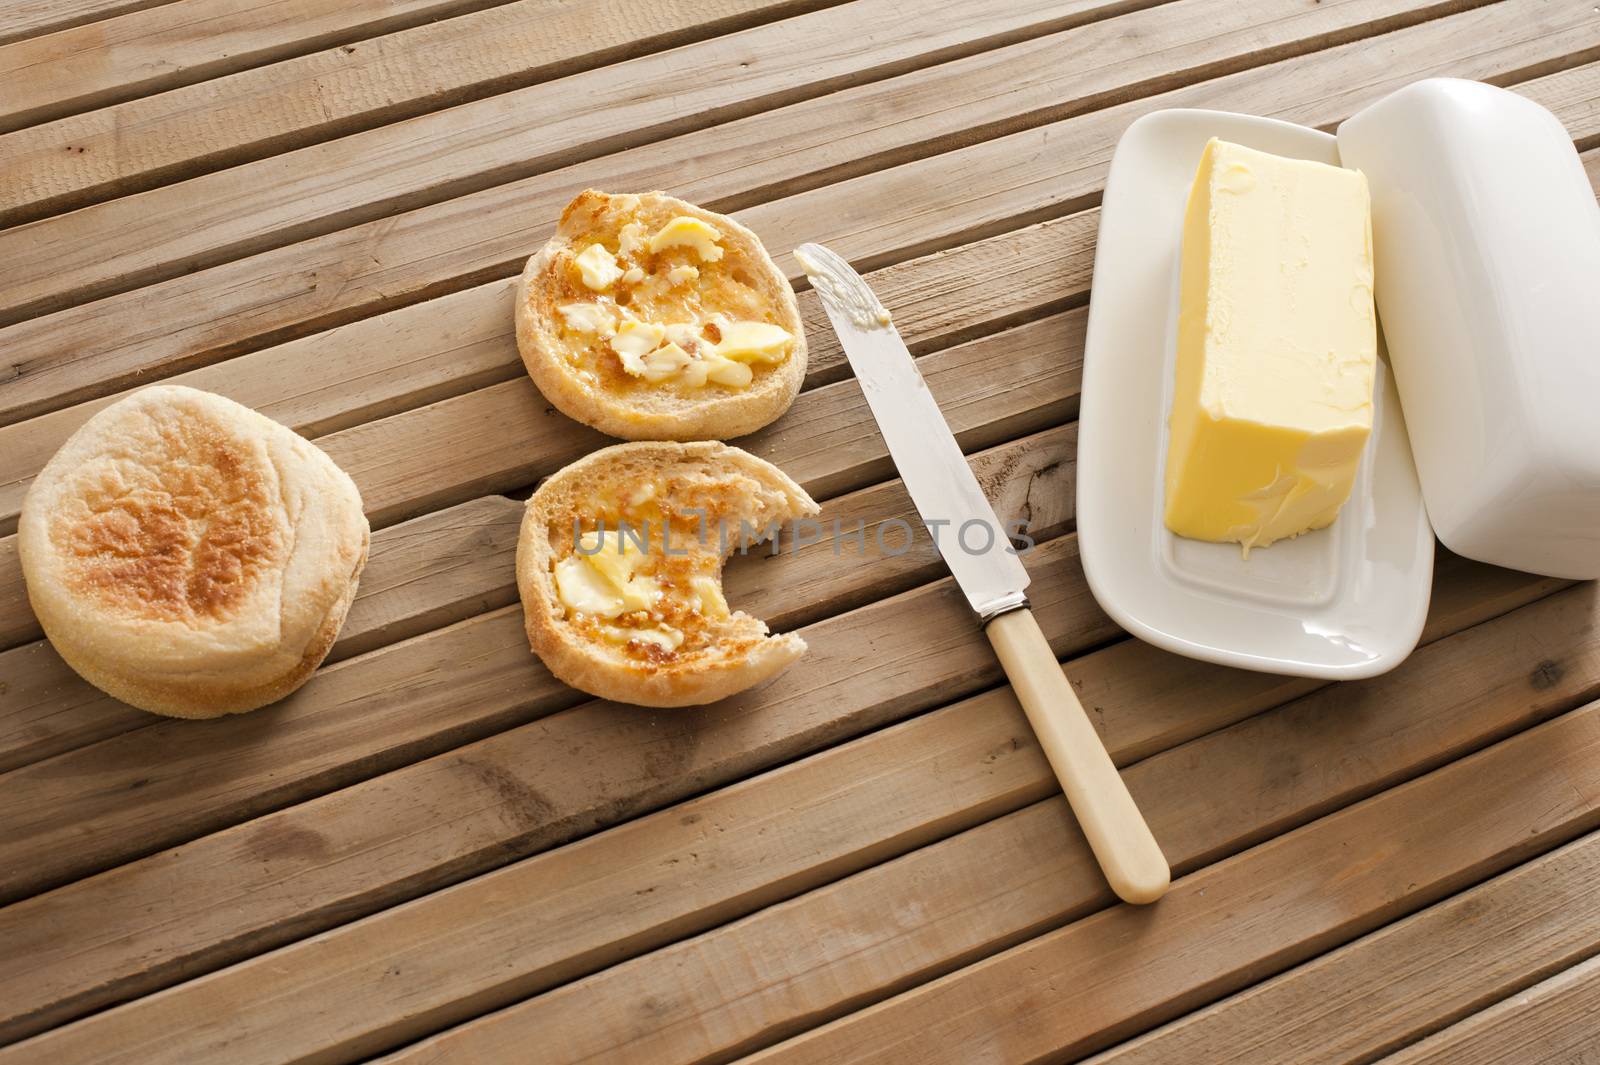 Buttered crumpets, one bitten into, with a pat of farm butter on a wooden slatted table, high angle view